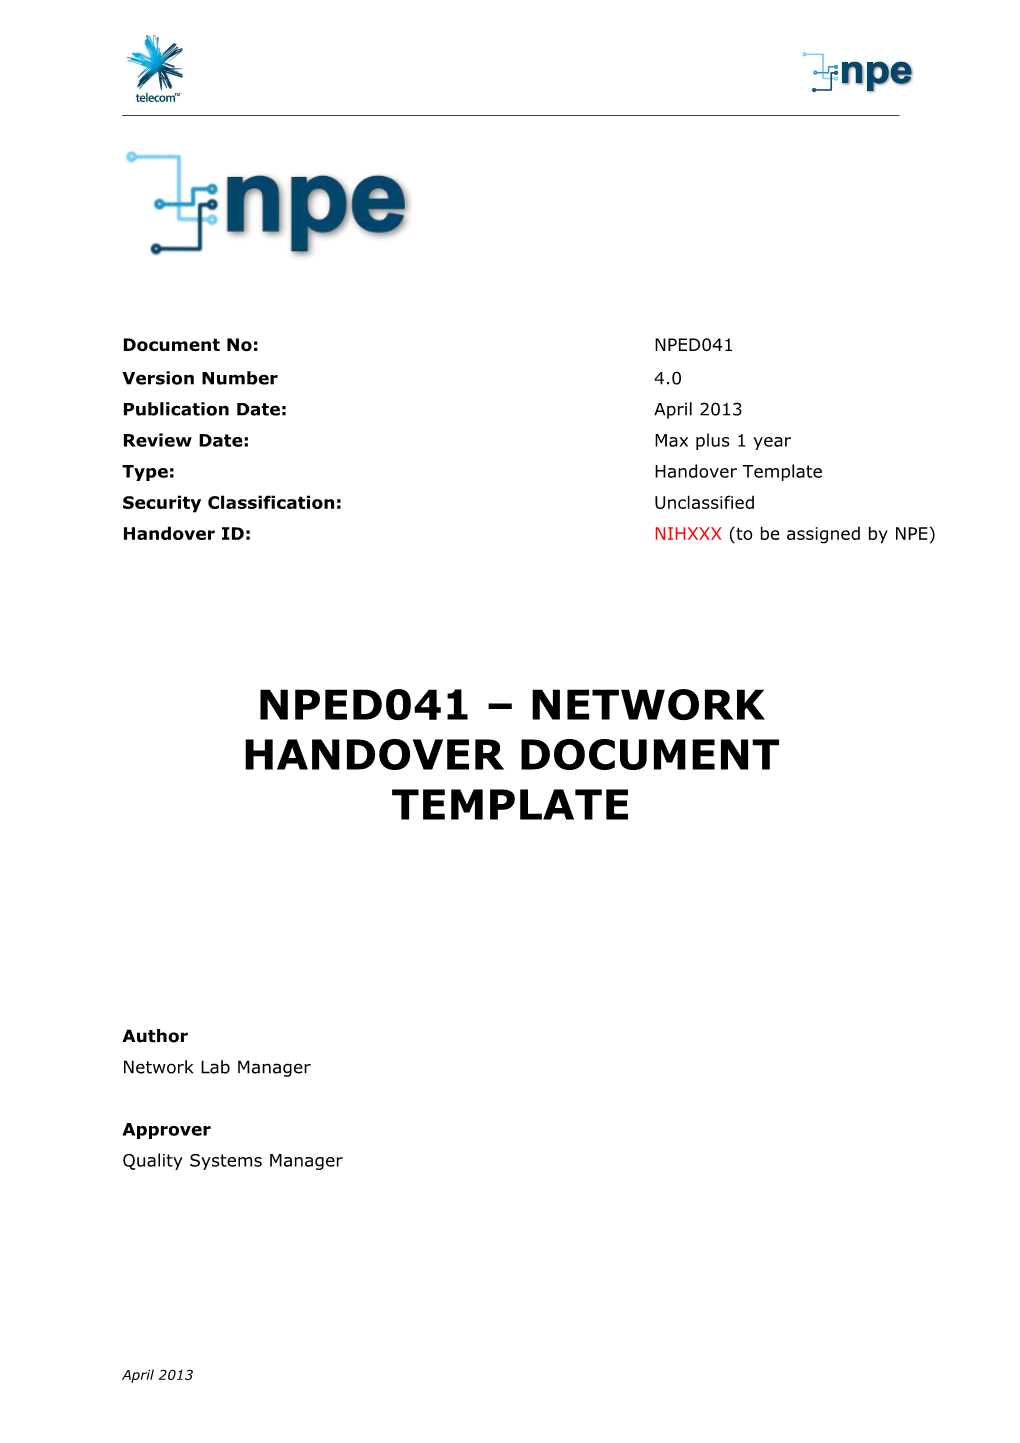 NPED041 - Network Handover Document Template